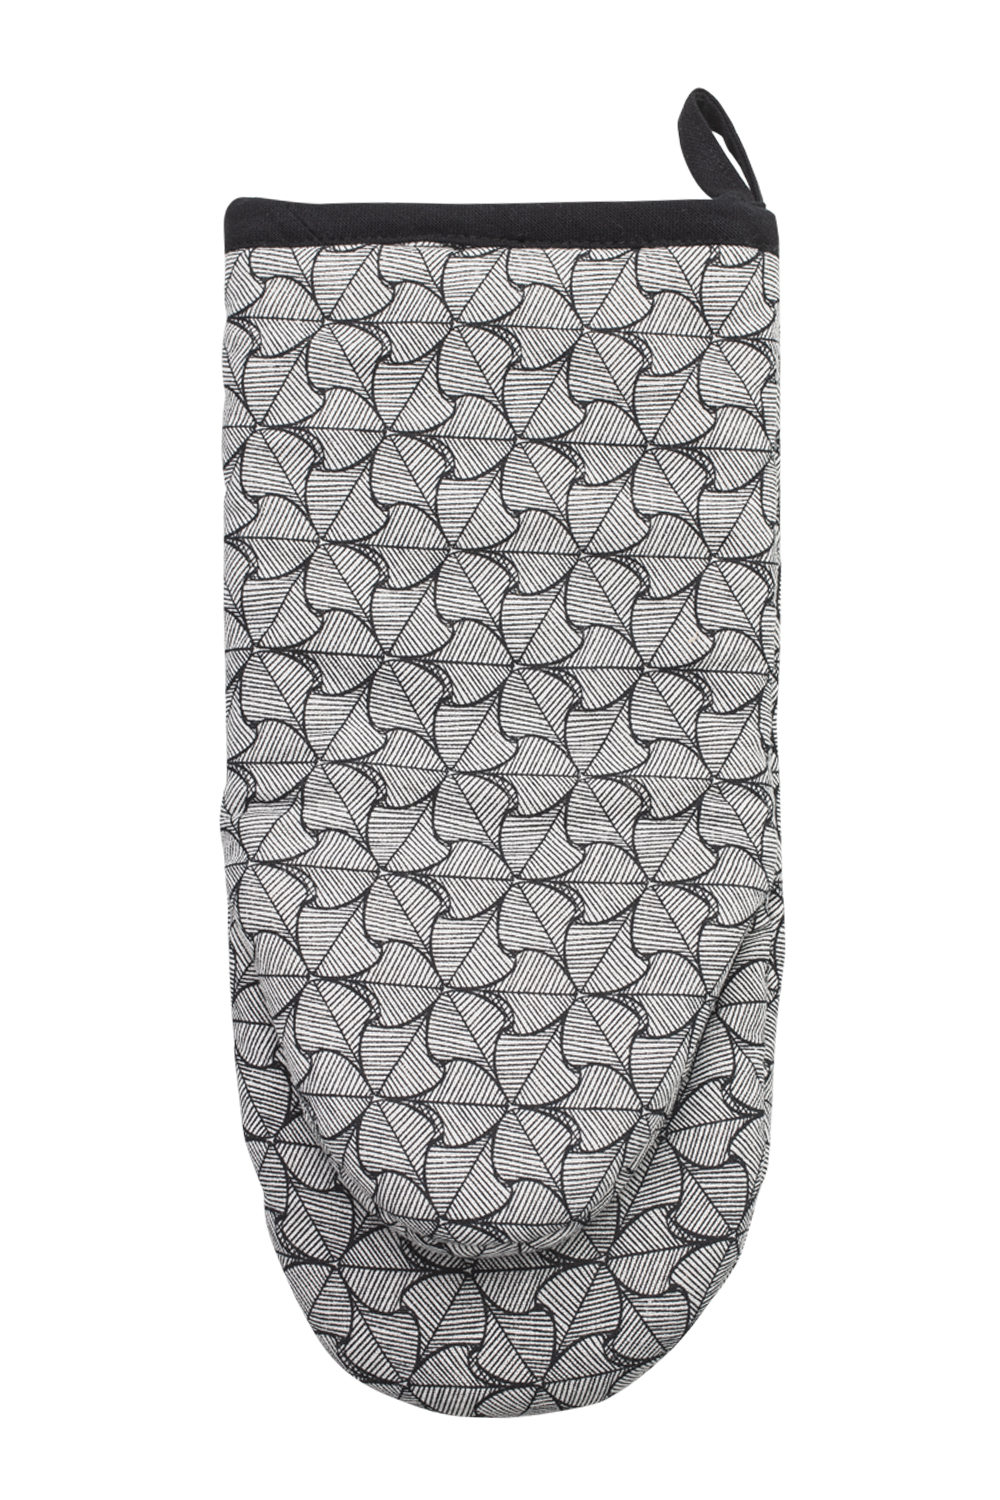 Tranquillo Oven Glove - Floral - Sustainable